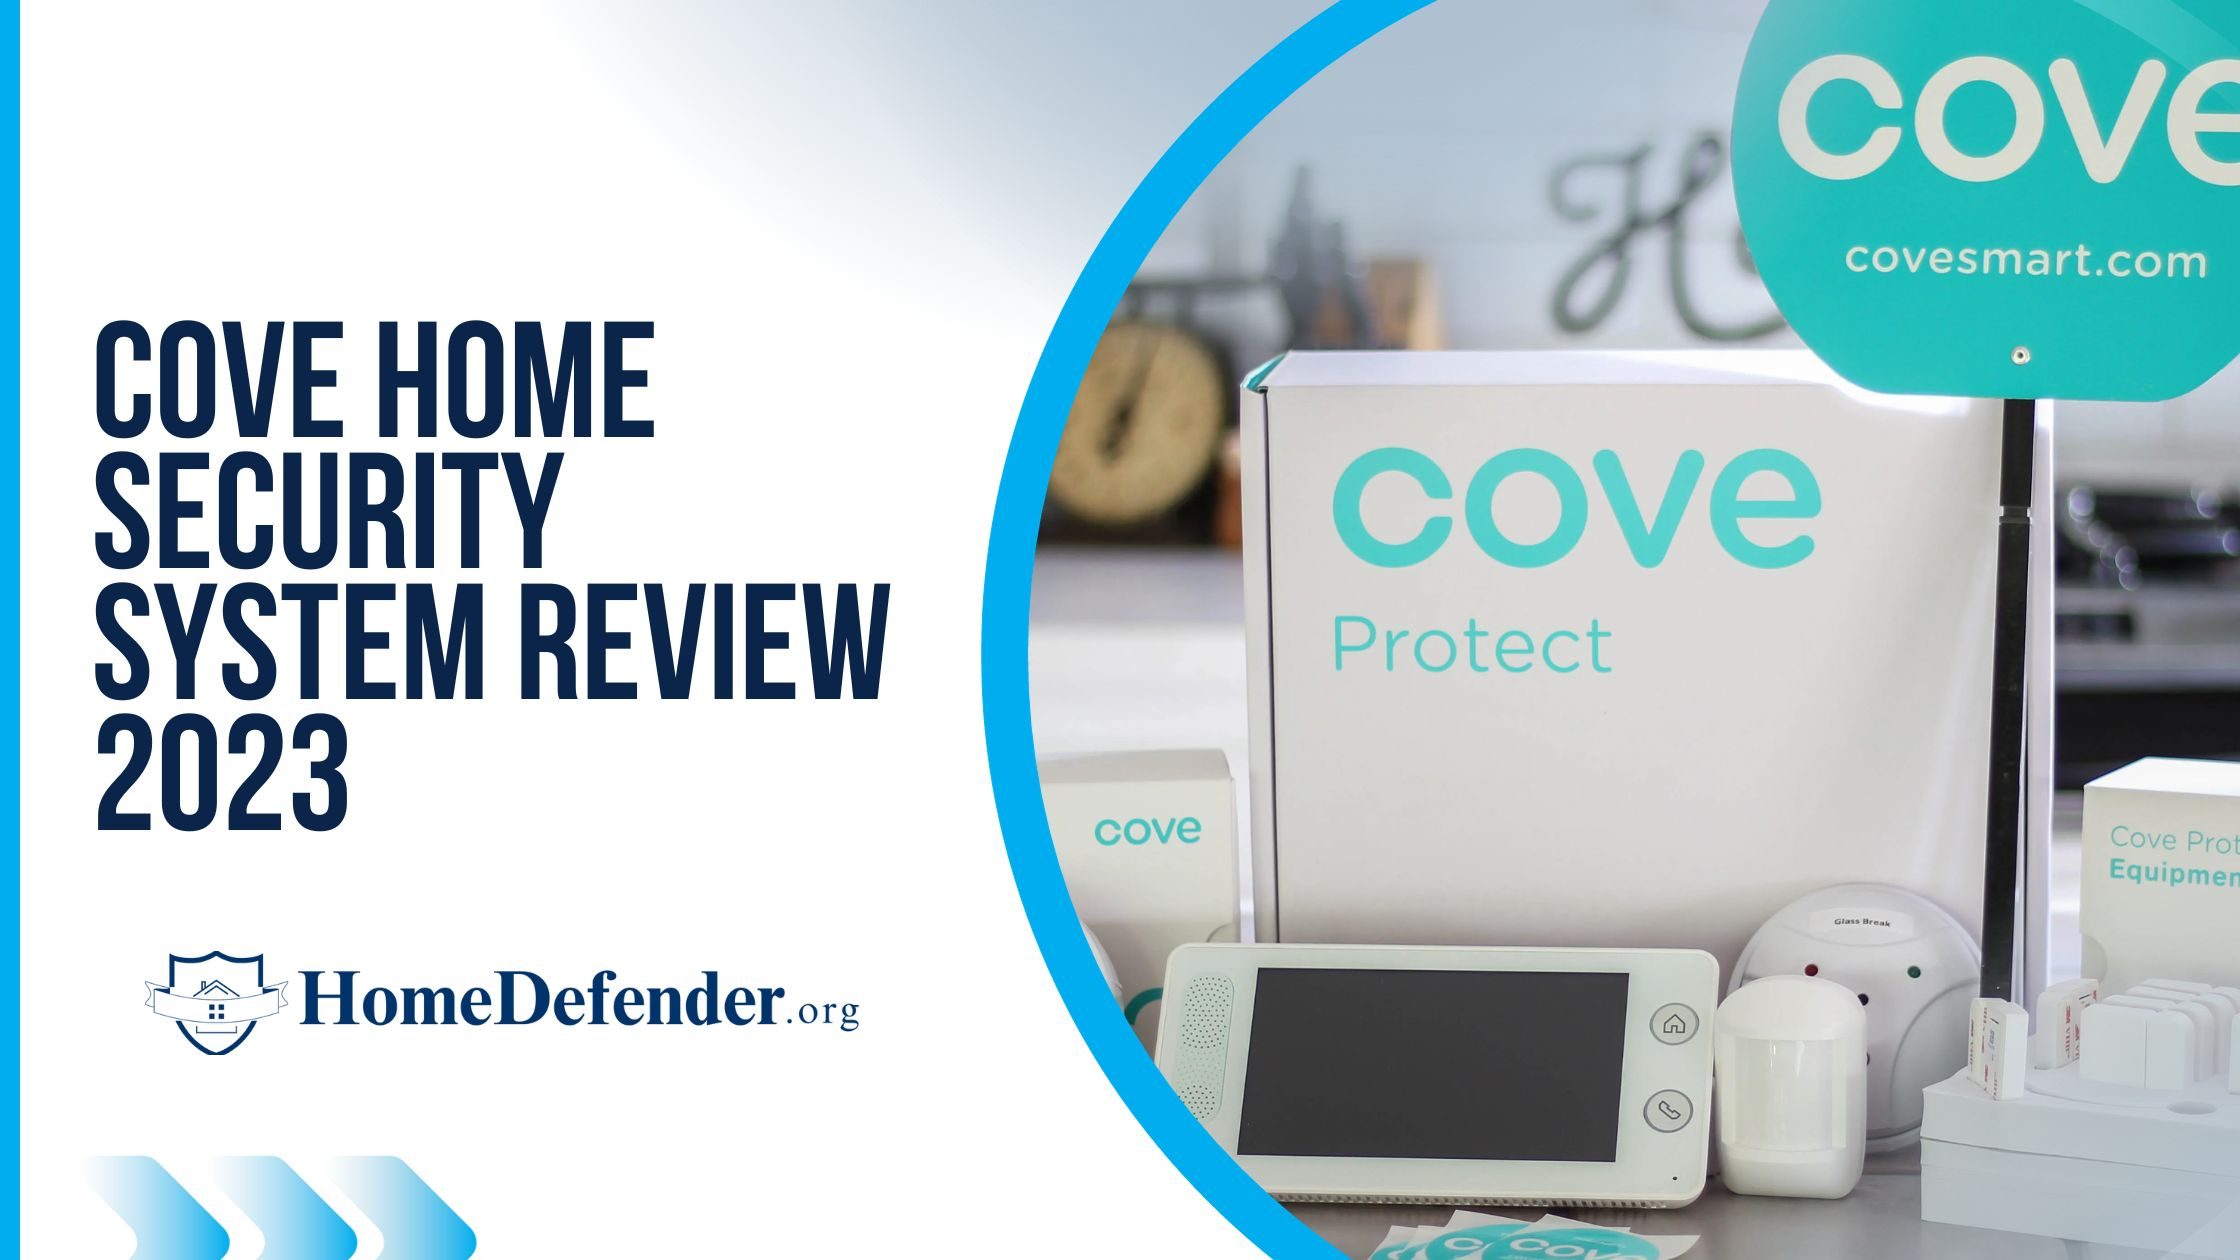 Cove Home Security System Review 2023